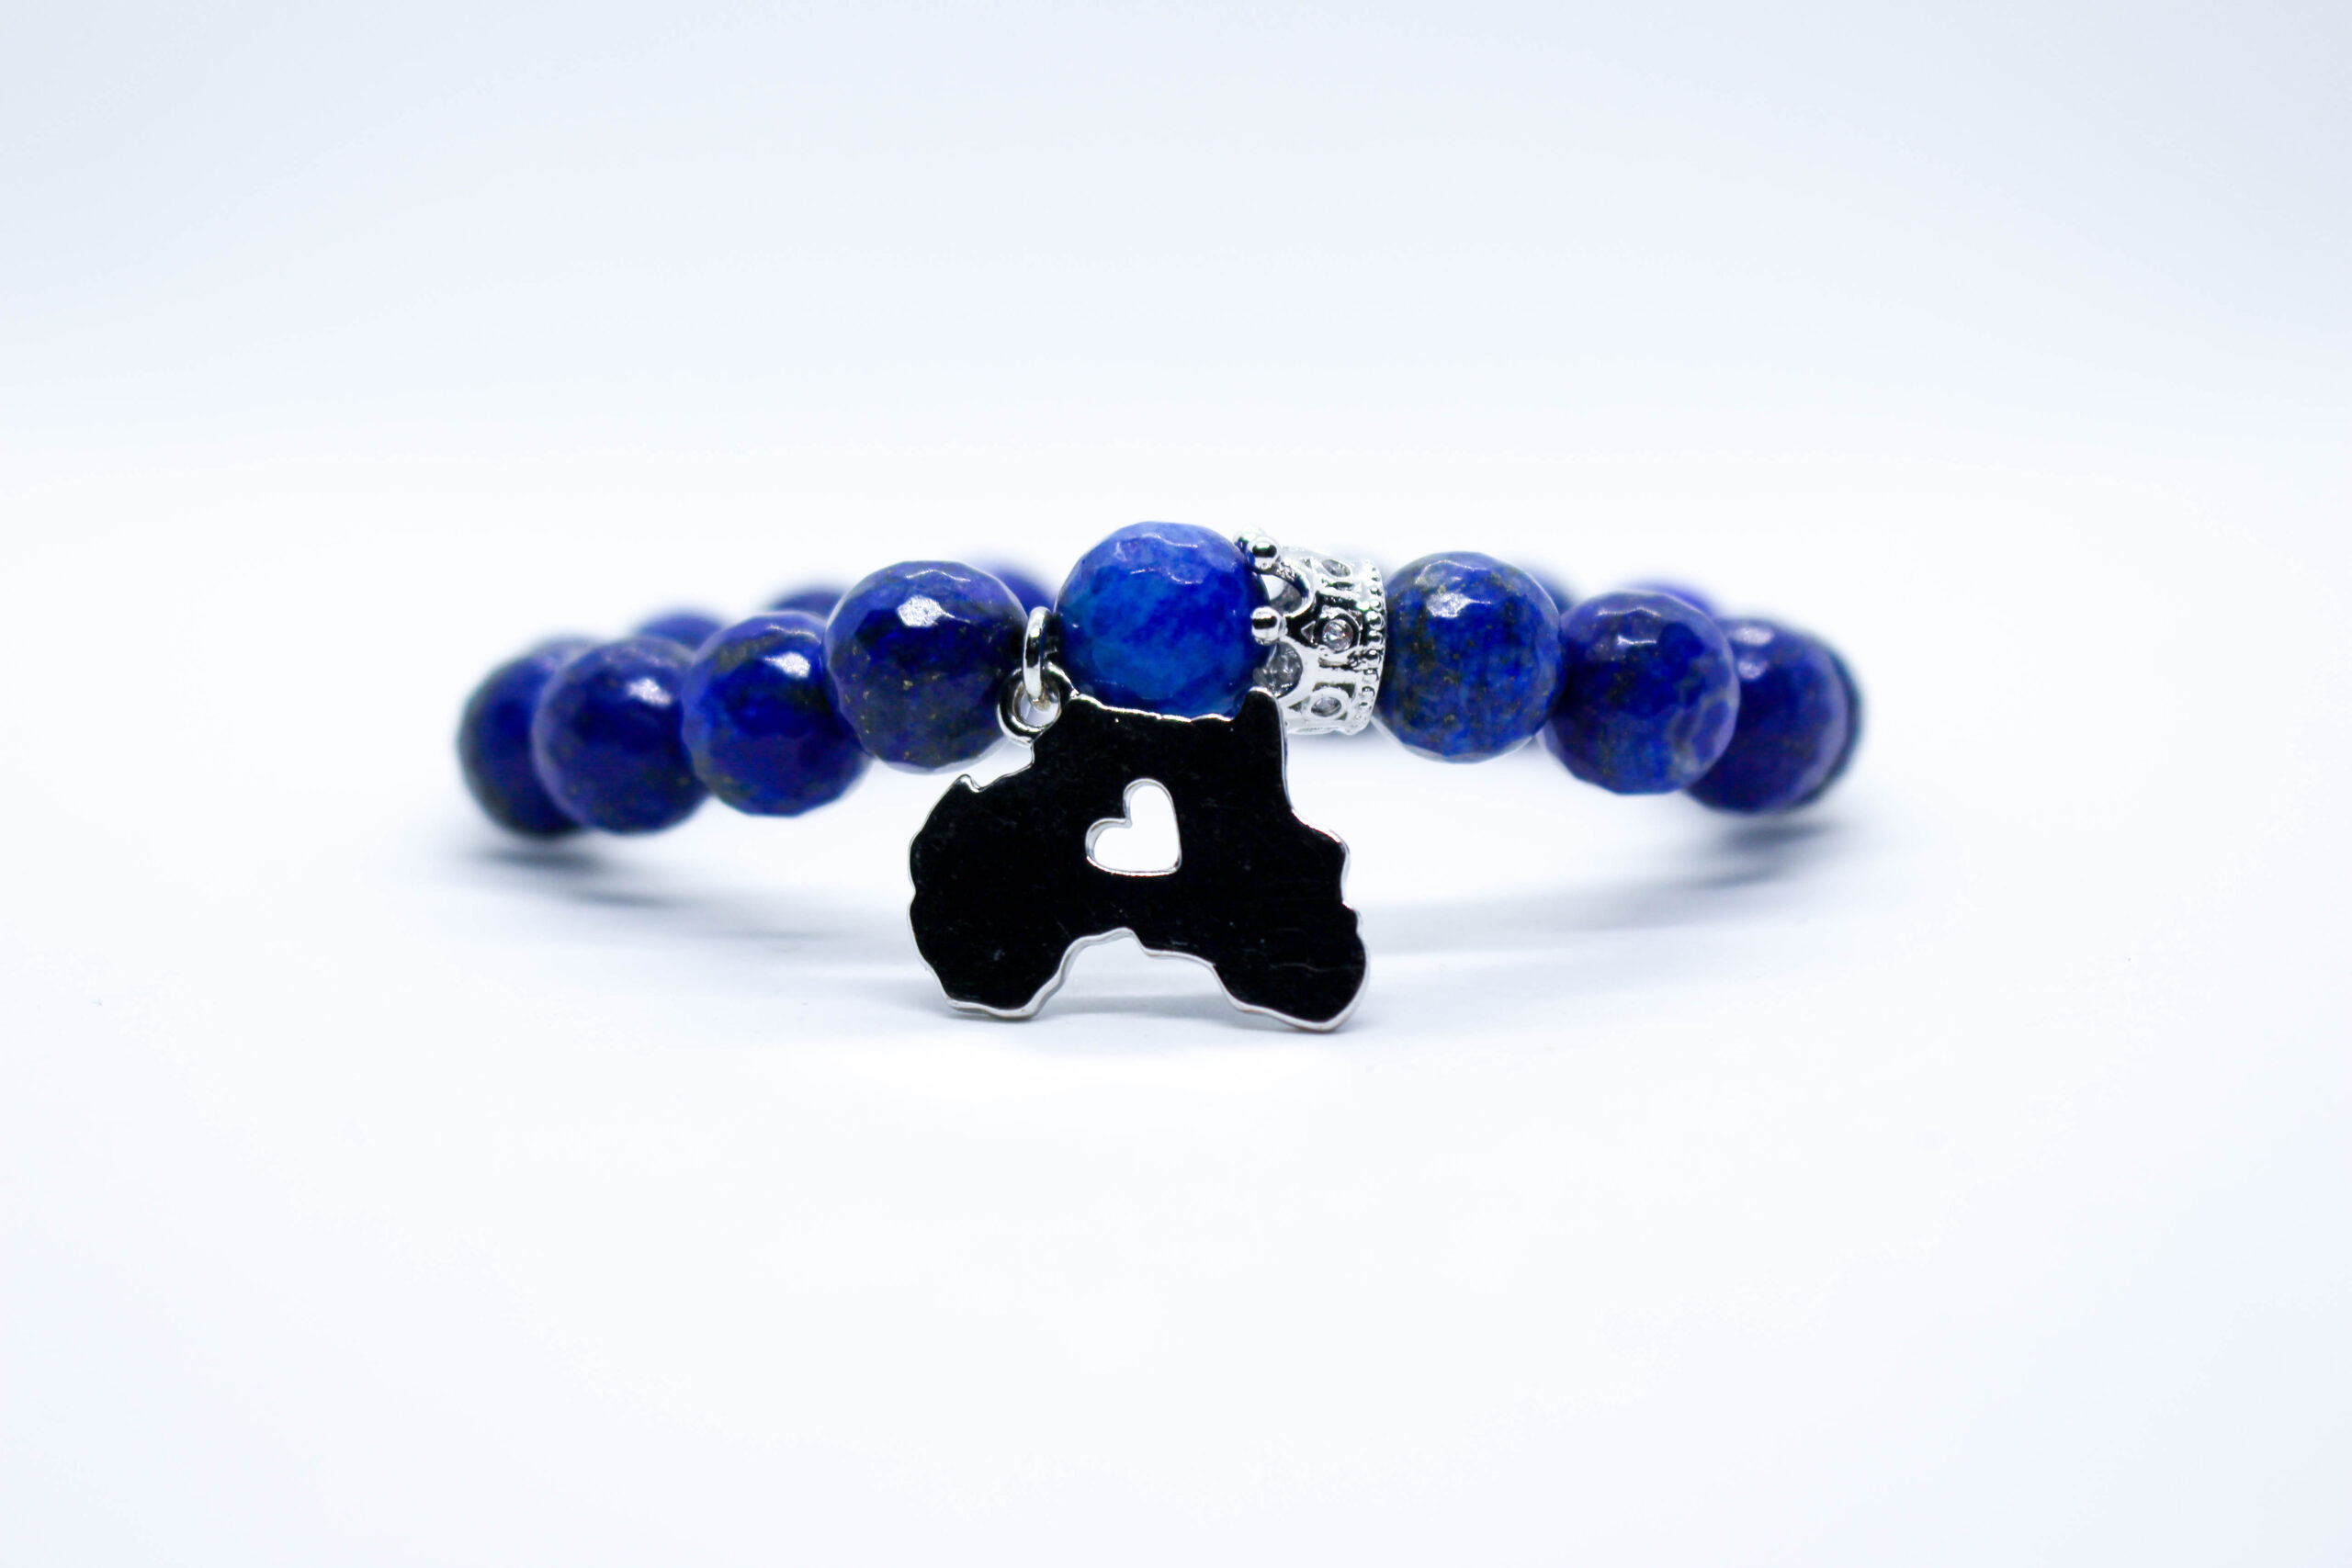 2560px x 1707px - Heart of Africa Crowned Bracelet (Faceted Lapis Lazuli Crystal) 10mm Beads  | RockYourLocs